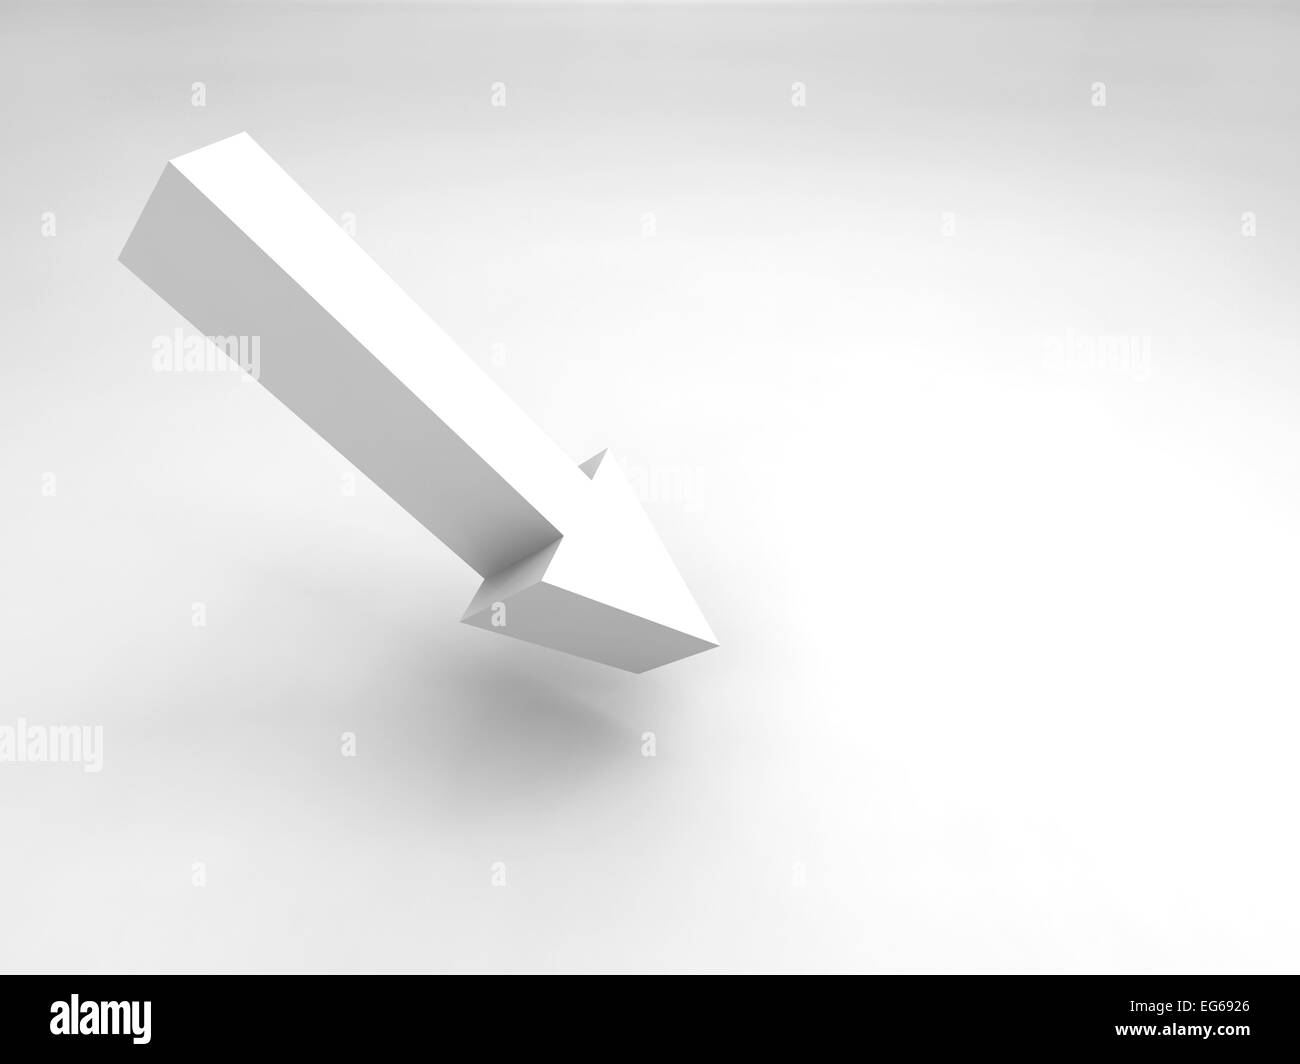 Abstract 3d illustration. Single arrow sign and soft shadow Stock Photo